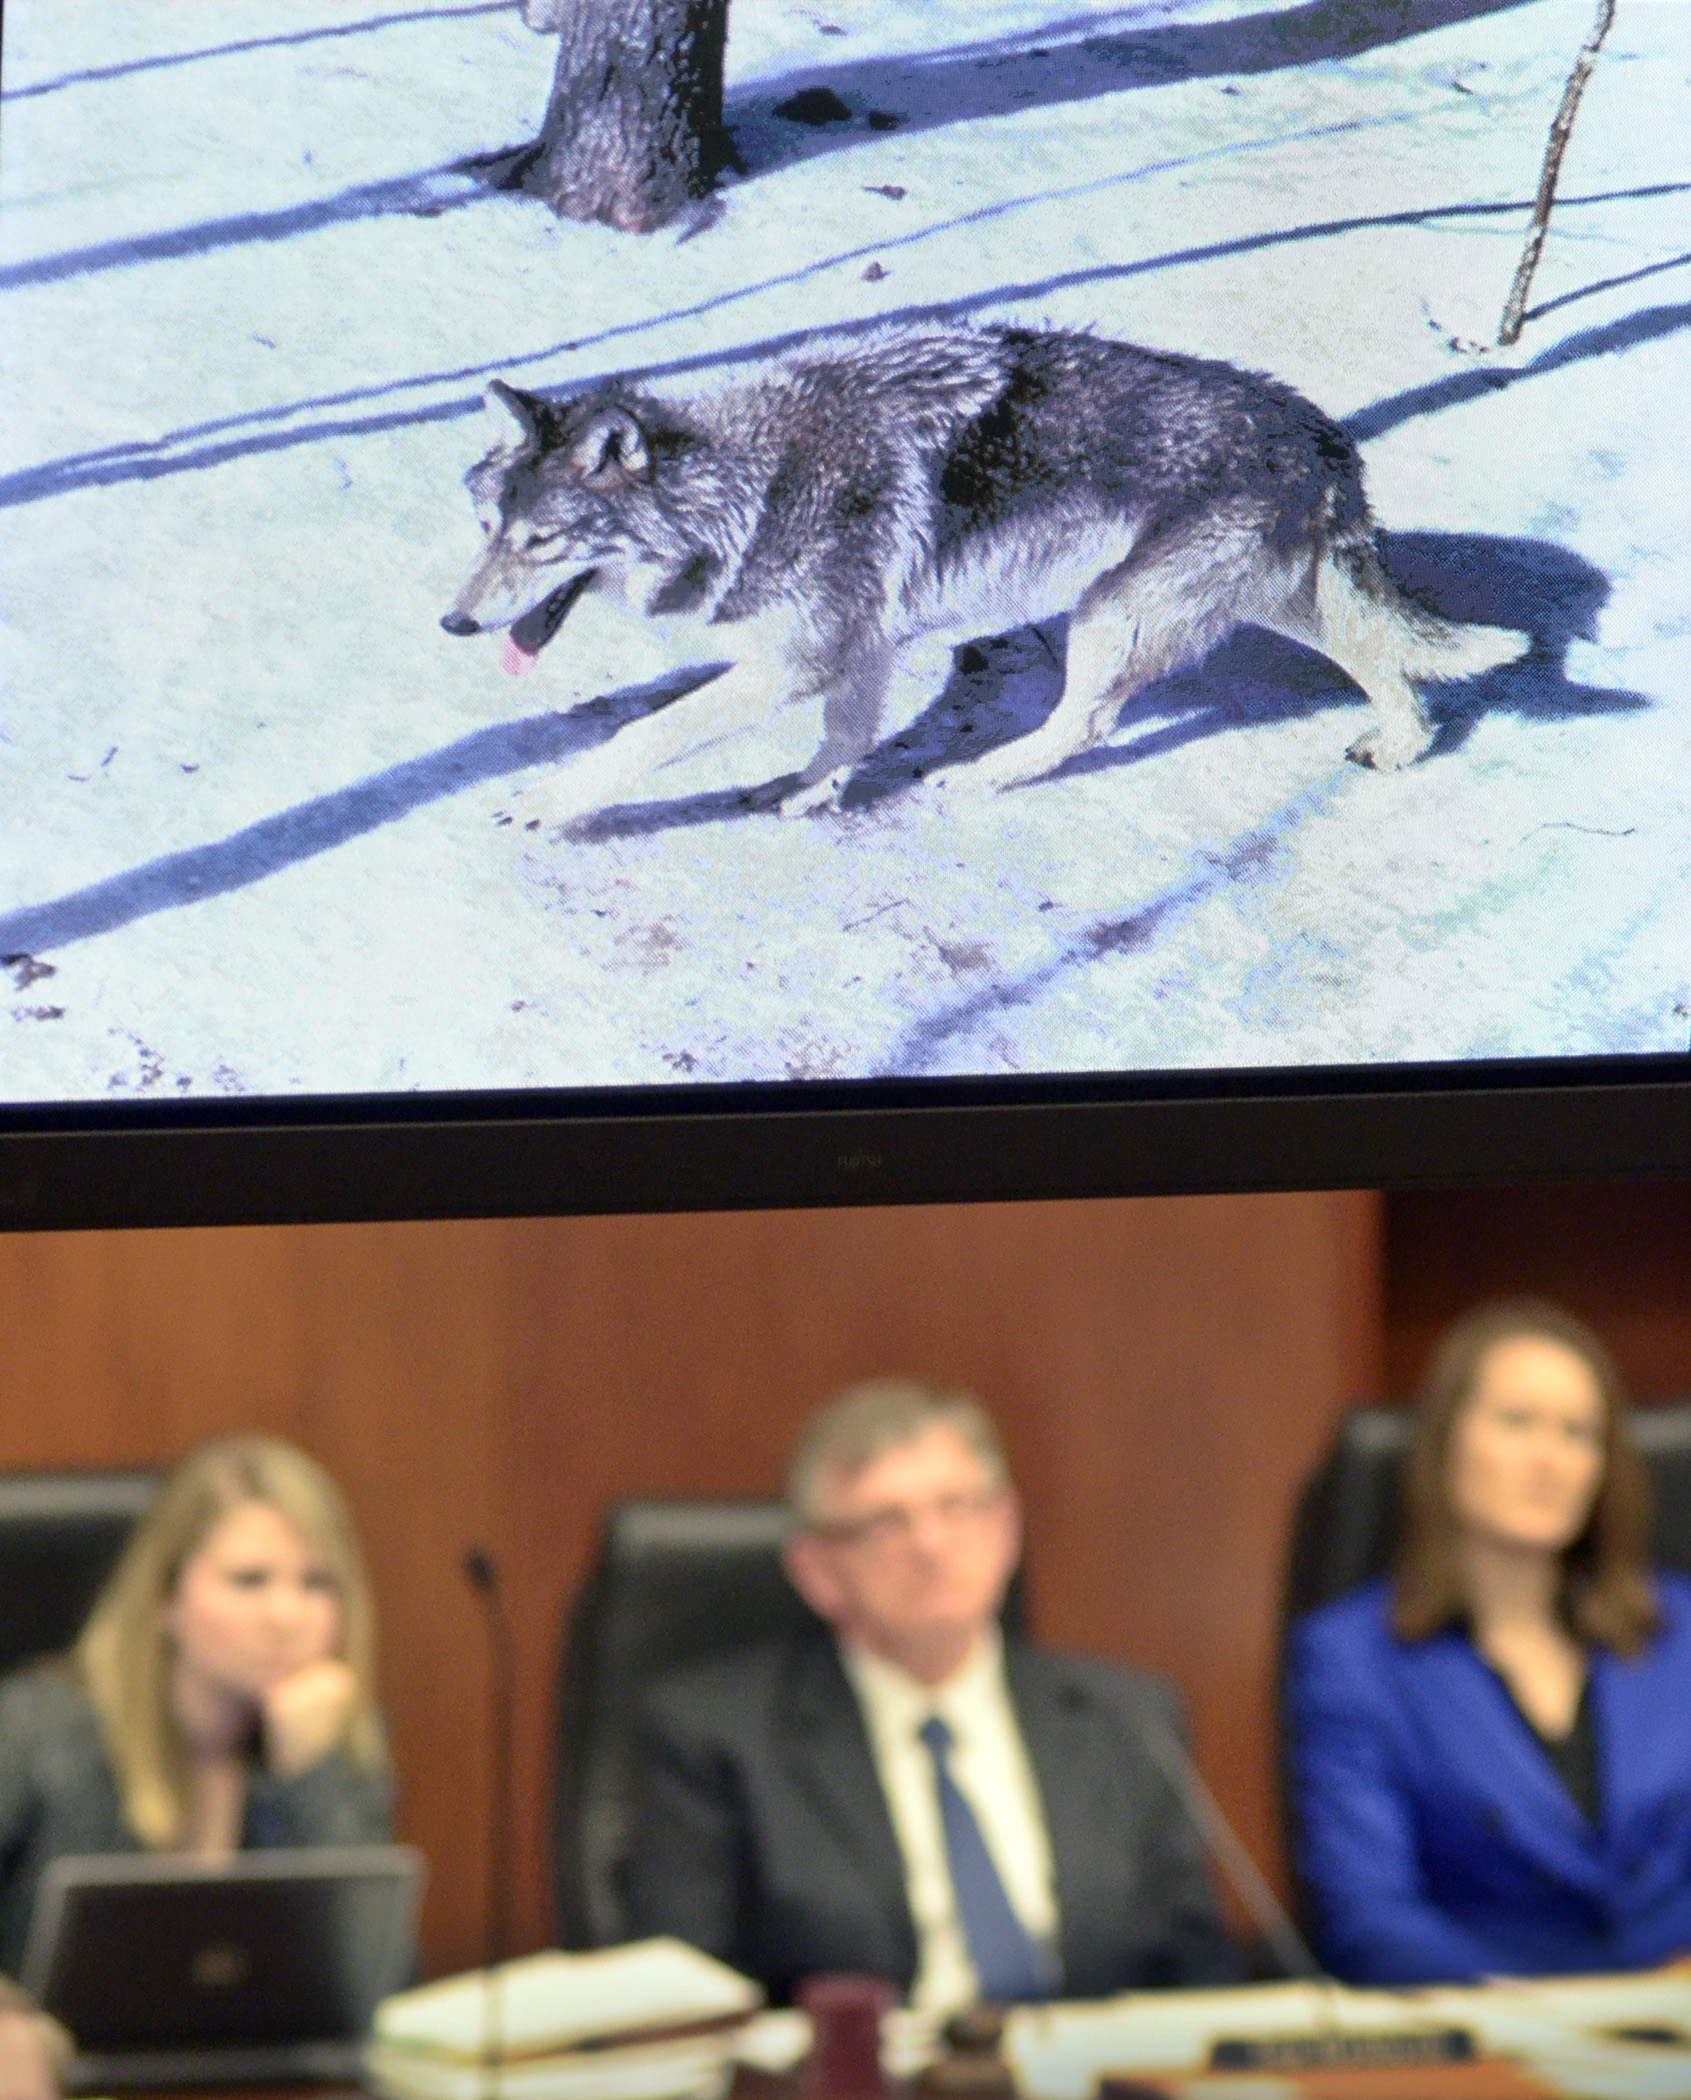 Members of the House Mining and Outdoor Recreation Policy Committee watch a PowerPoint presentation on the status of Minnesota wolves Jan. 20. Dr. David Mech, a senior research scientist with the USGS Northern Prairie Wildlife Research Center, is the presenter. Photo by Andrew VonBank